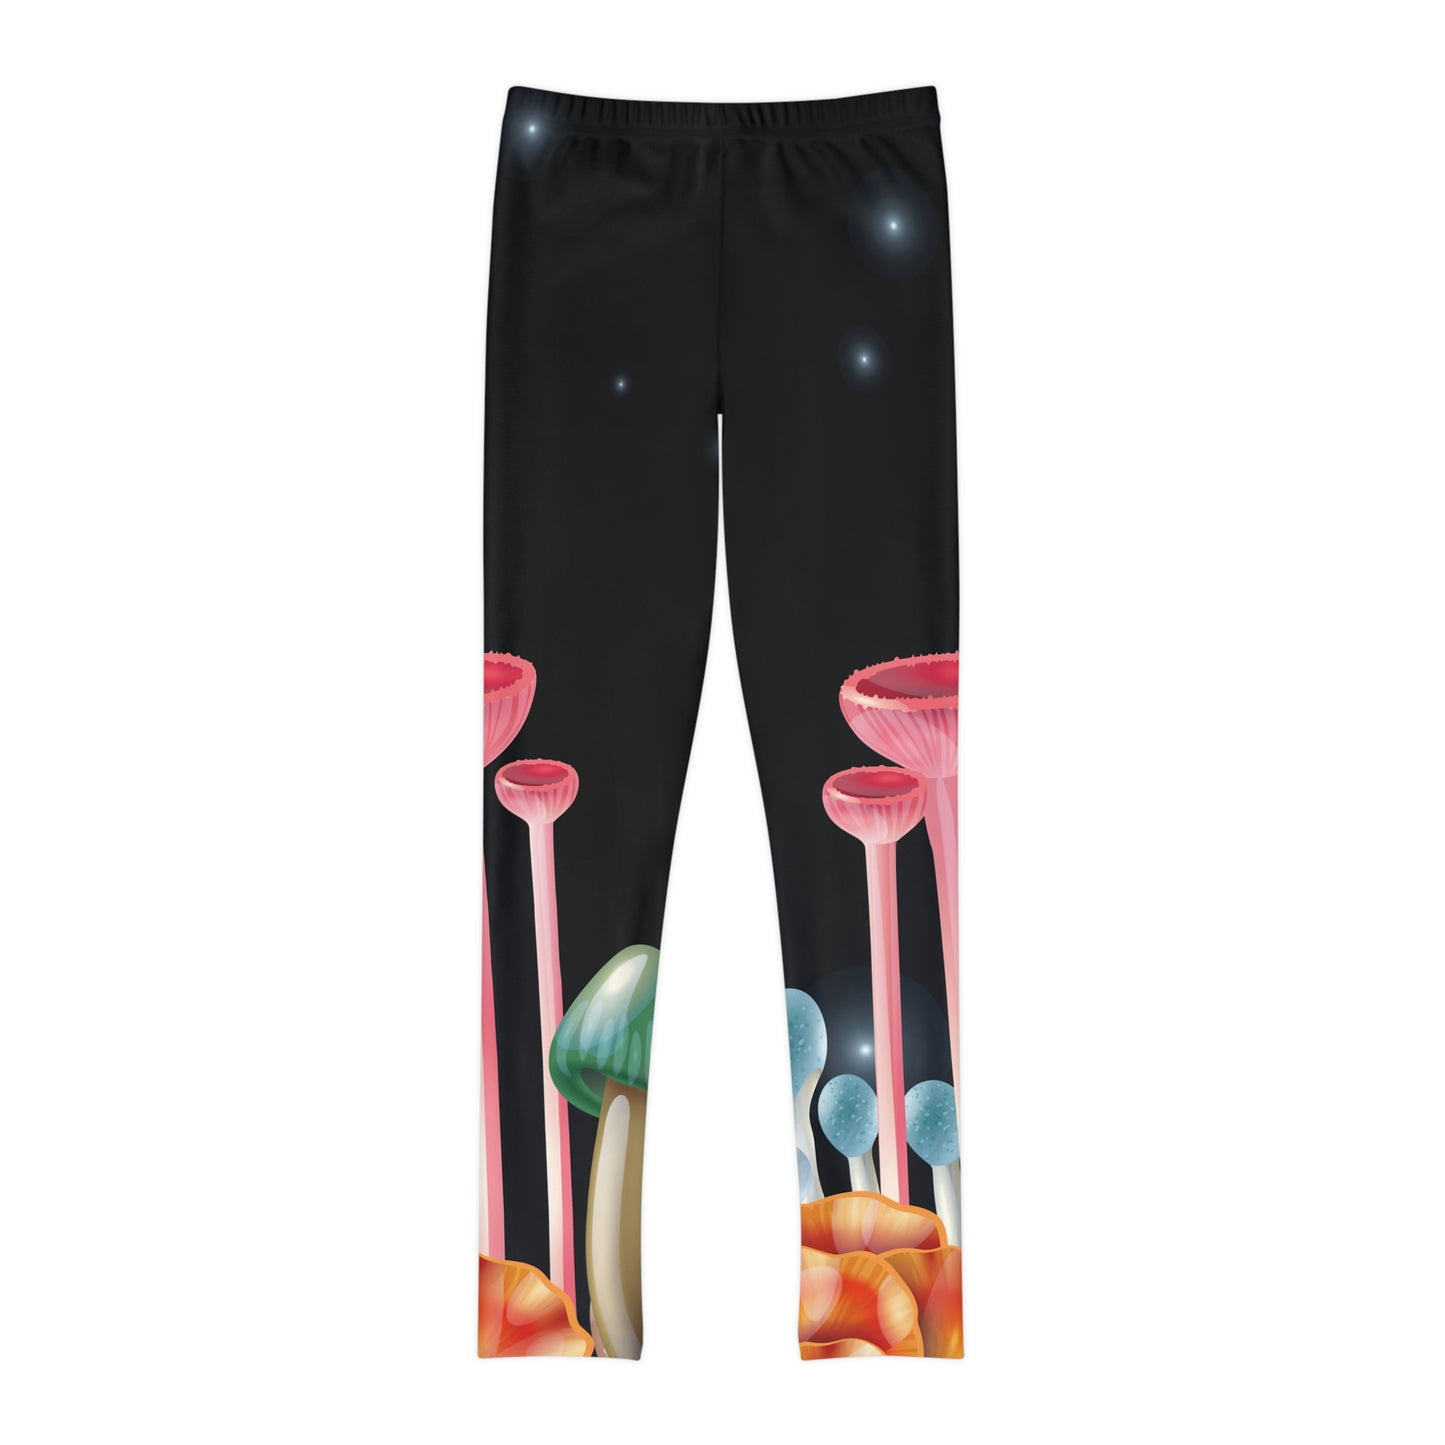 Magic Mushrooms cottagecore, Psychedelic Youth Leggings, One of a Kind - Kids Unique Workout Activewear tights, Daughter, Niece Christmas Gift